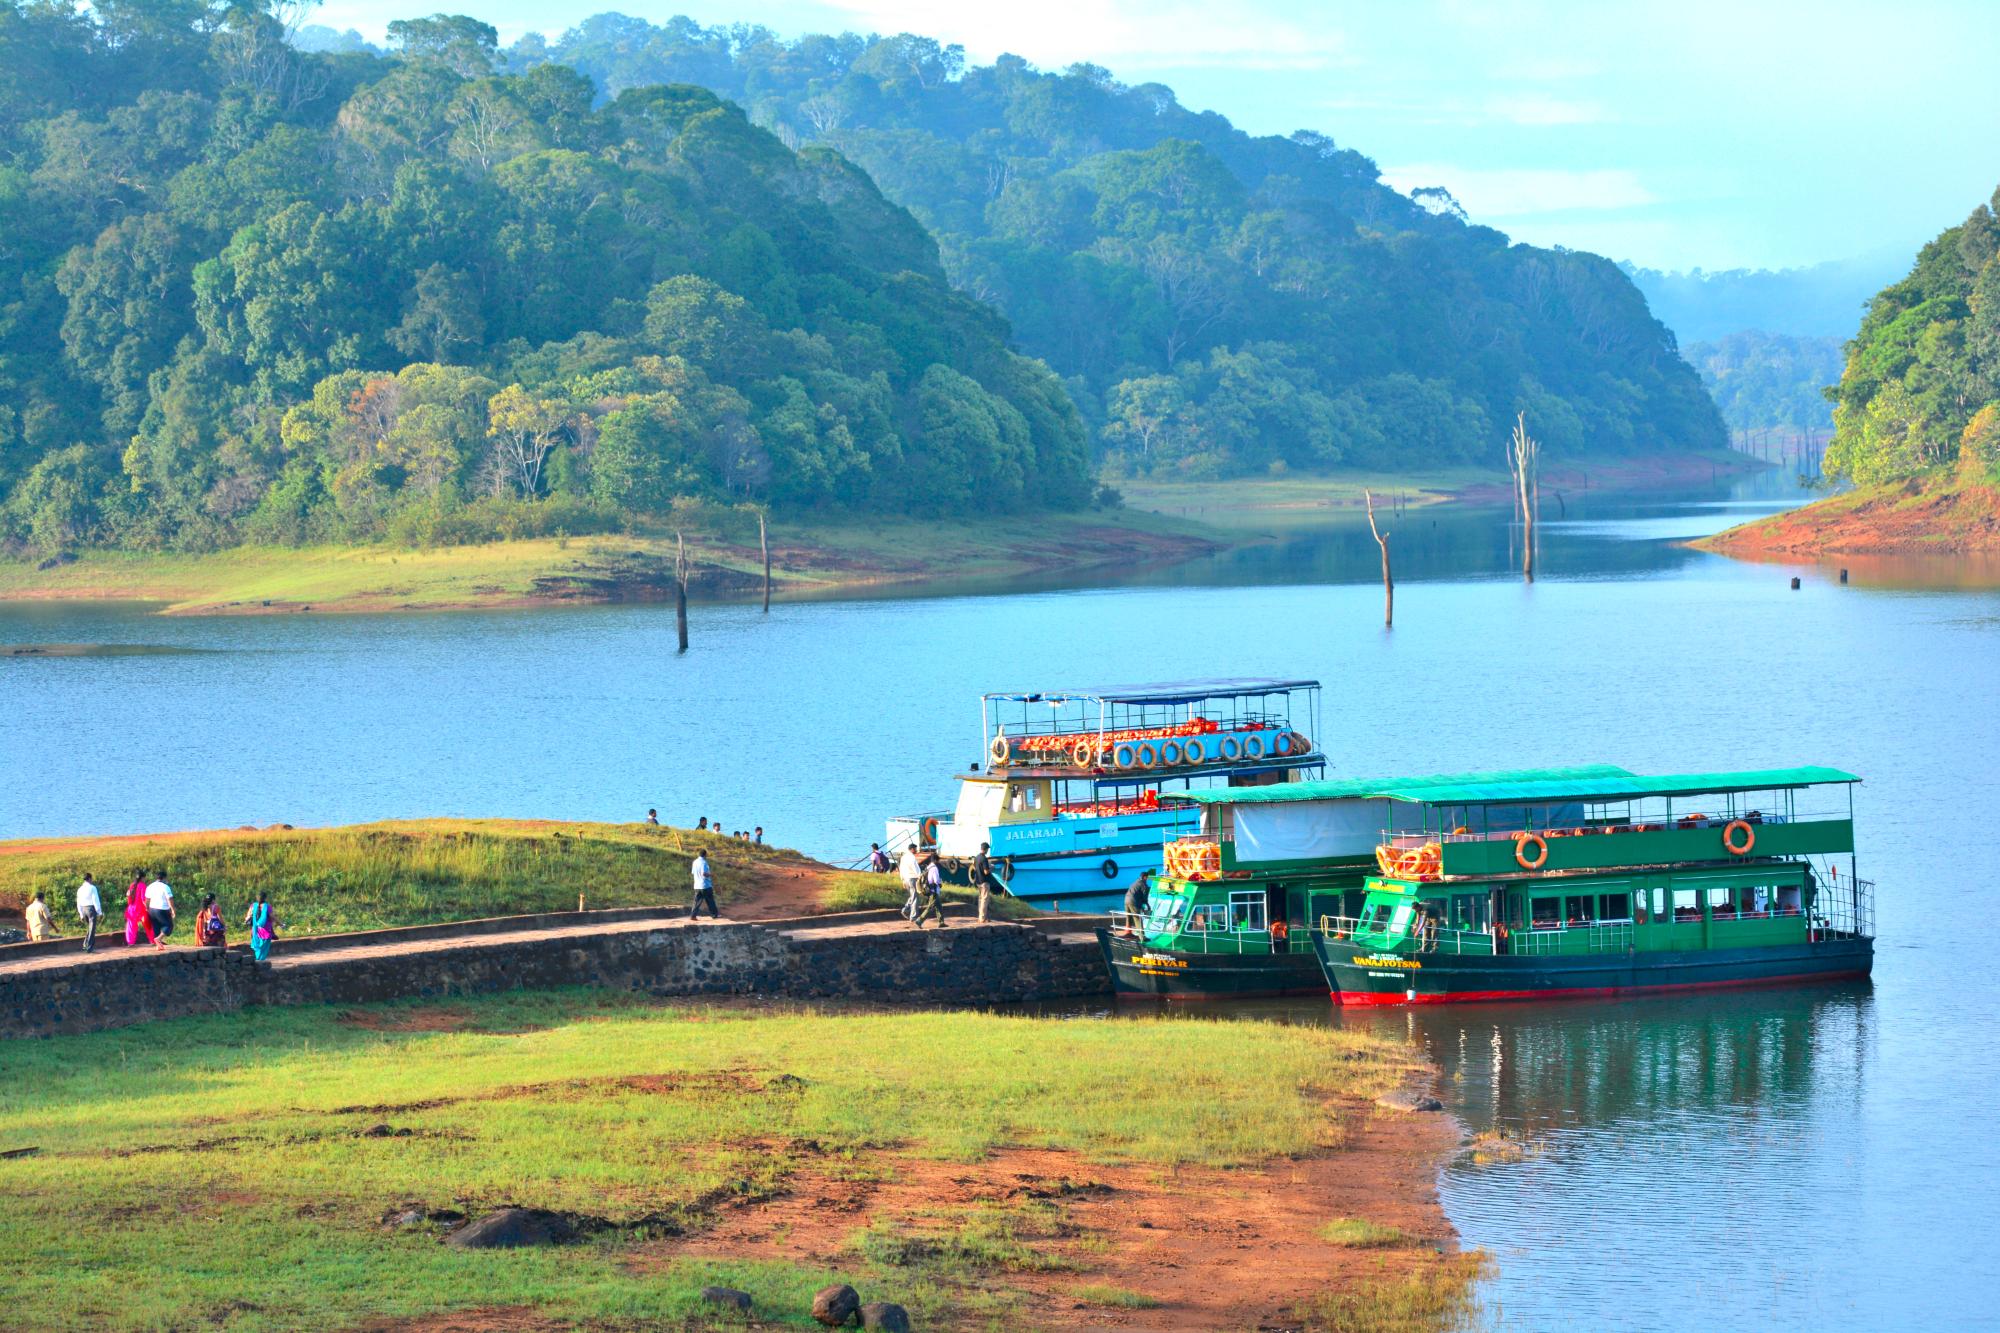 Thekkady is famous for its beautiful scenery and rich biodiversity.